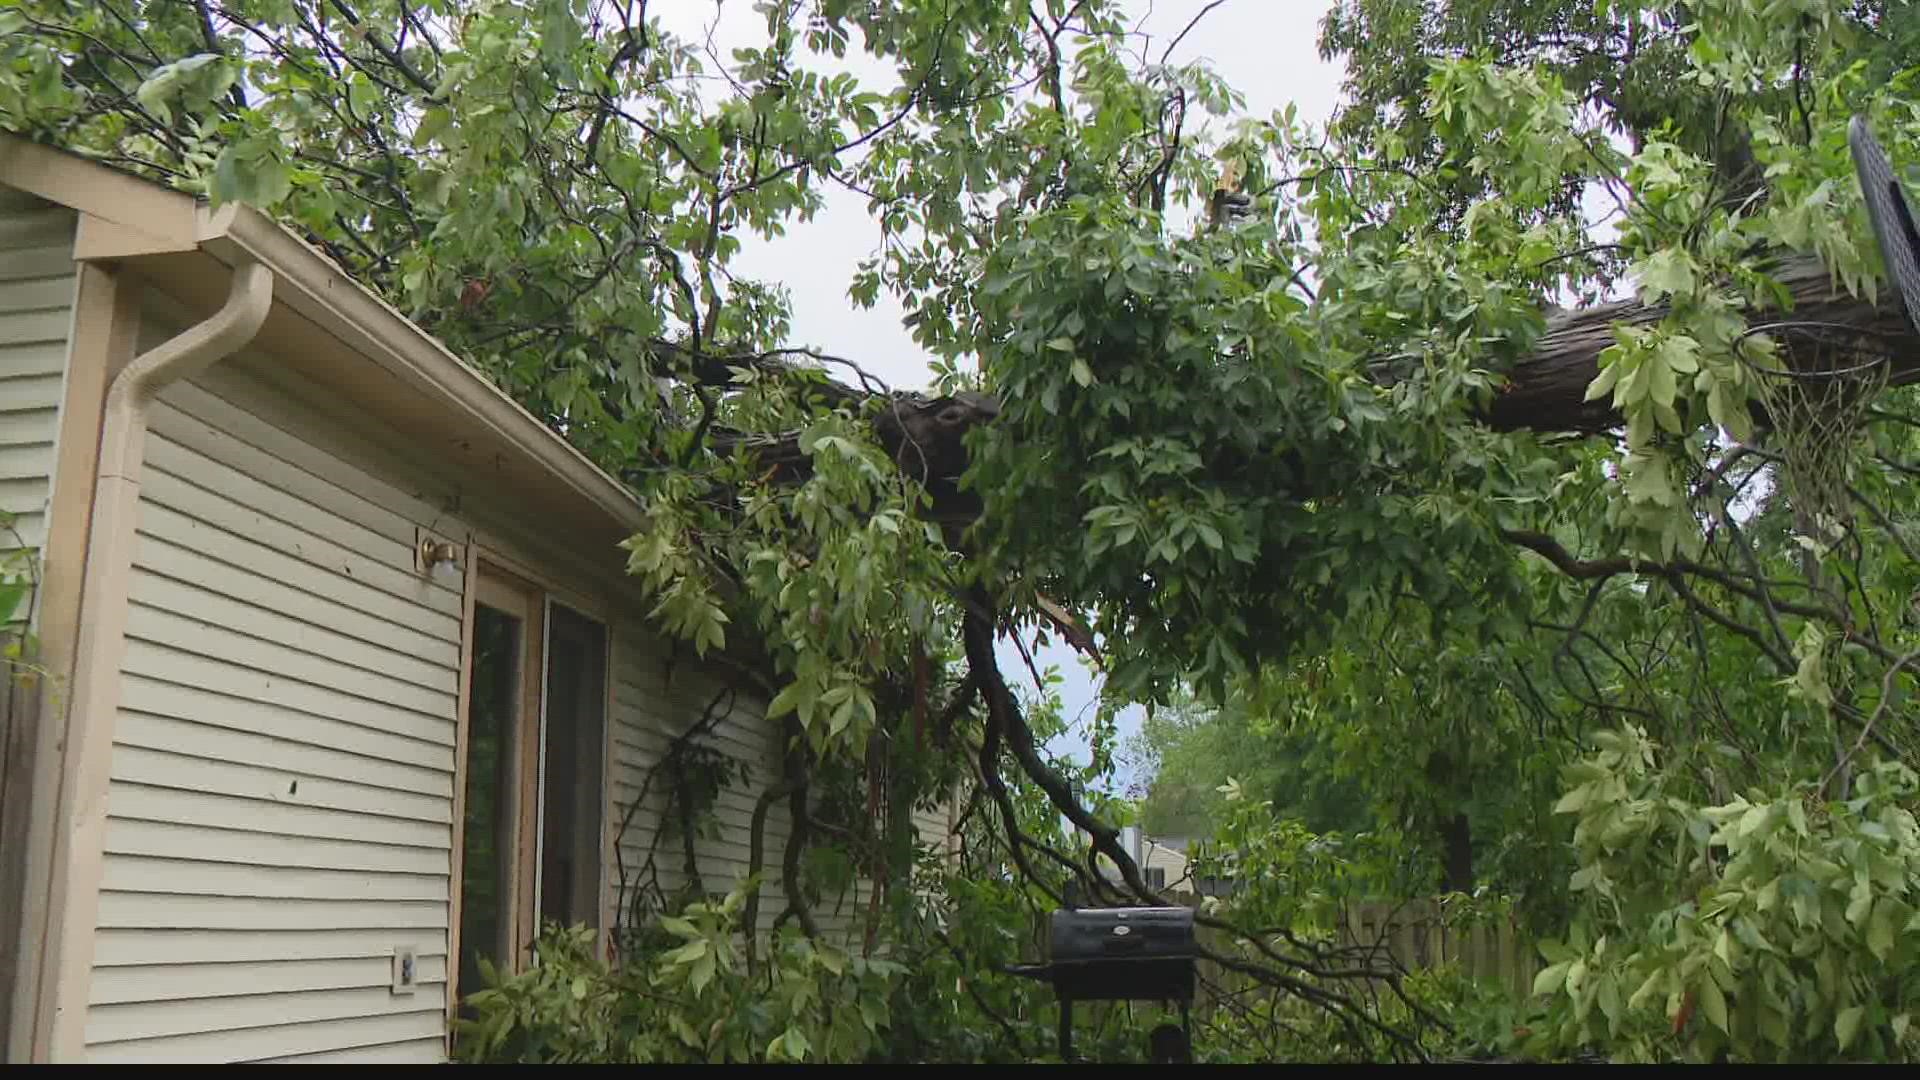 Parts of central Indiana saw storm damage after storms rolled through the area Monday morning.